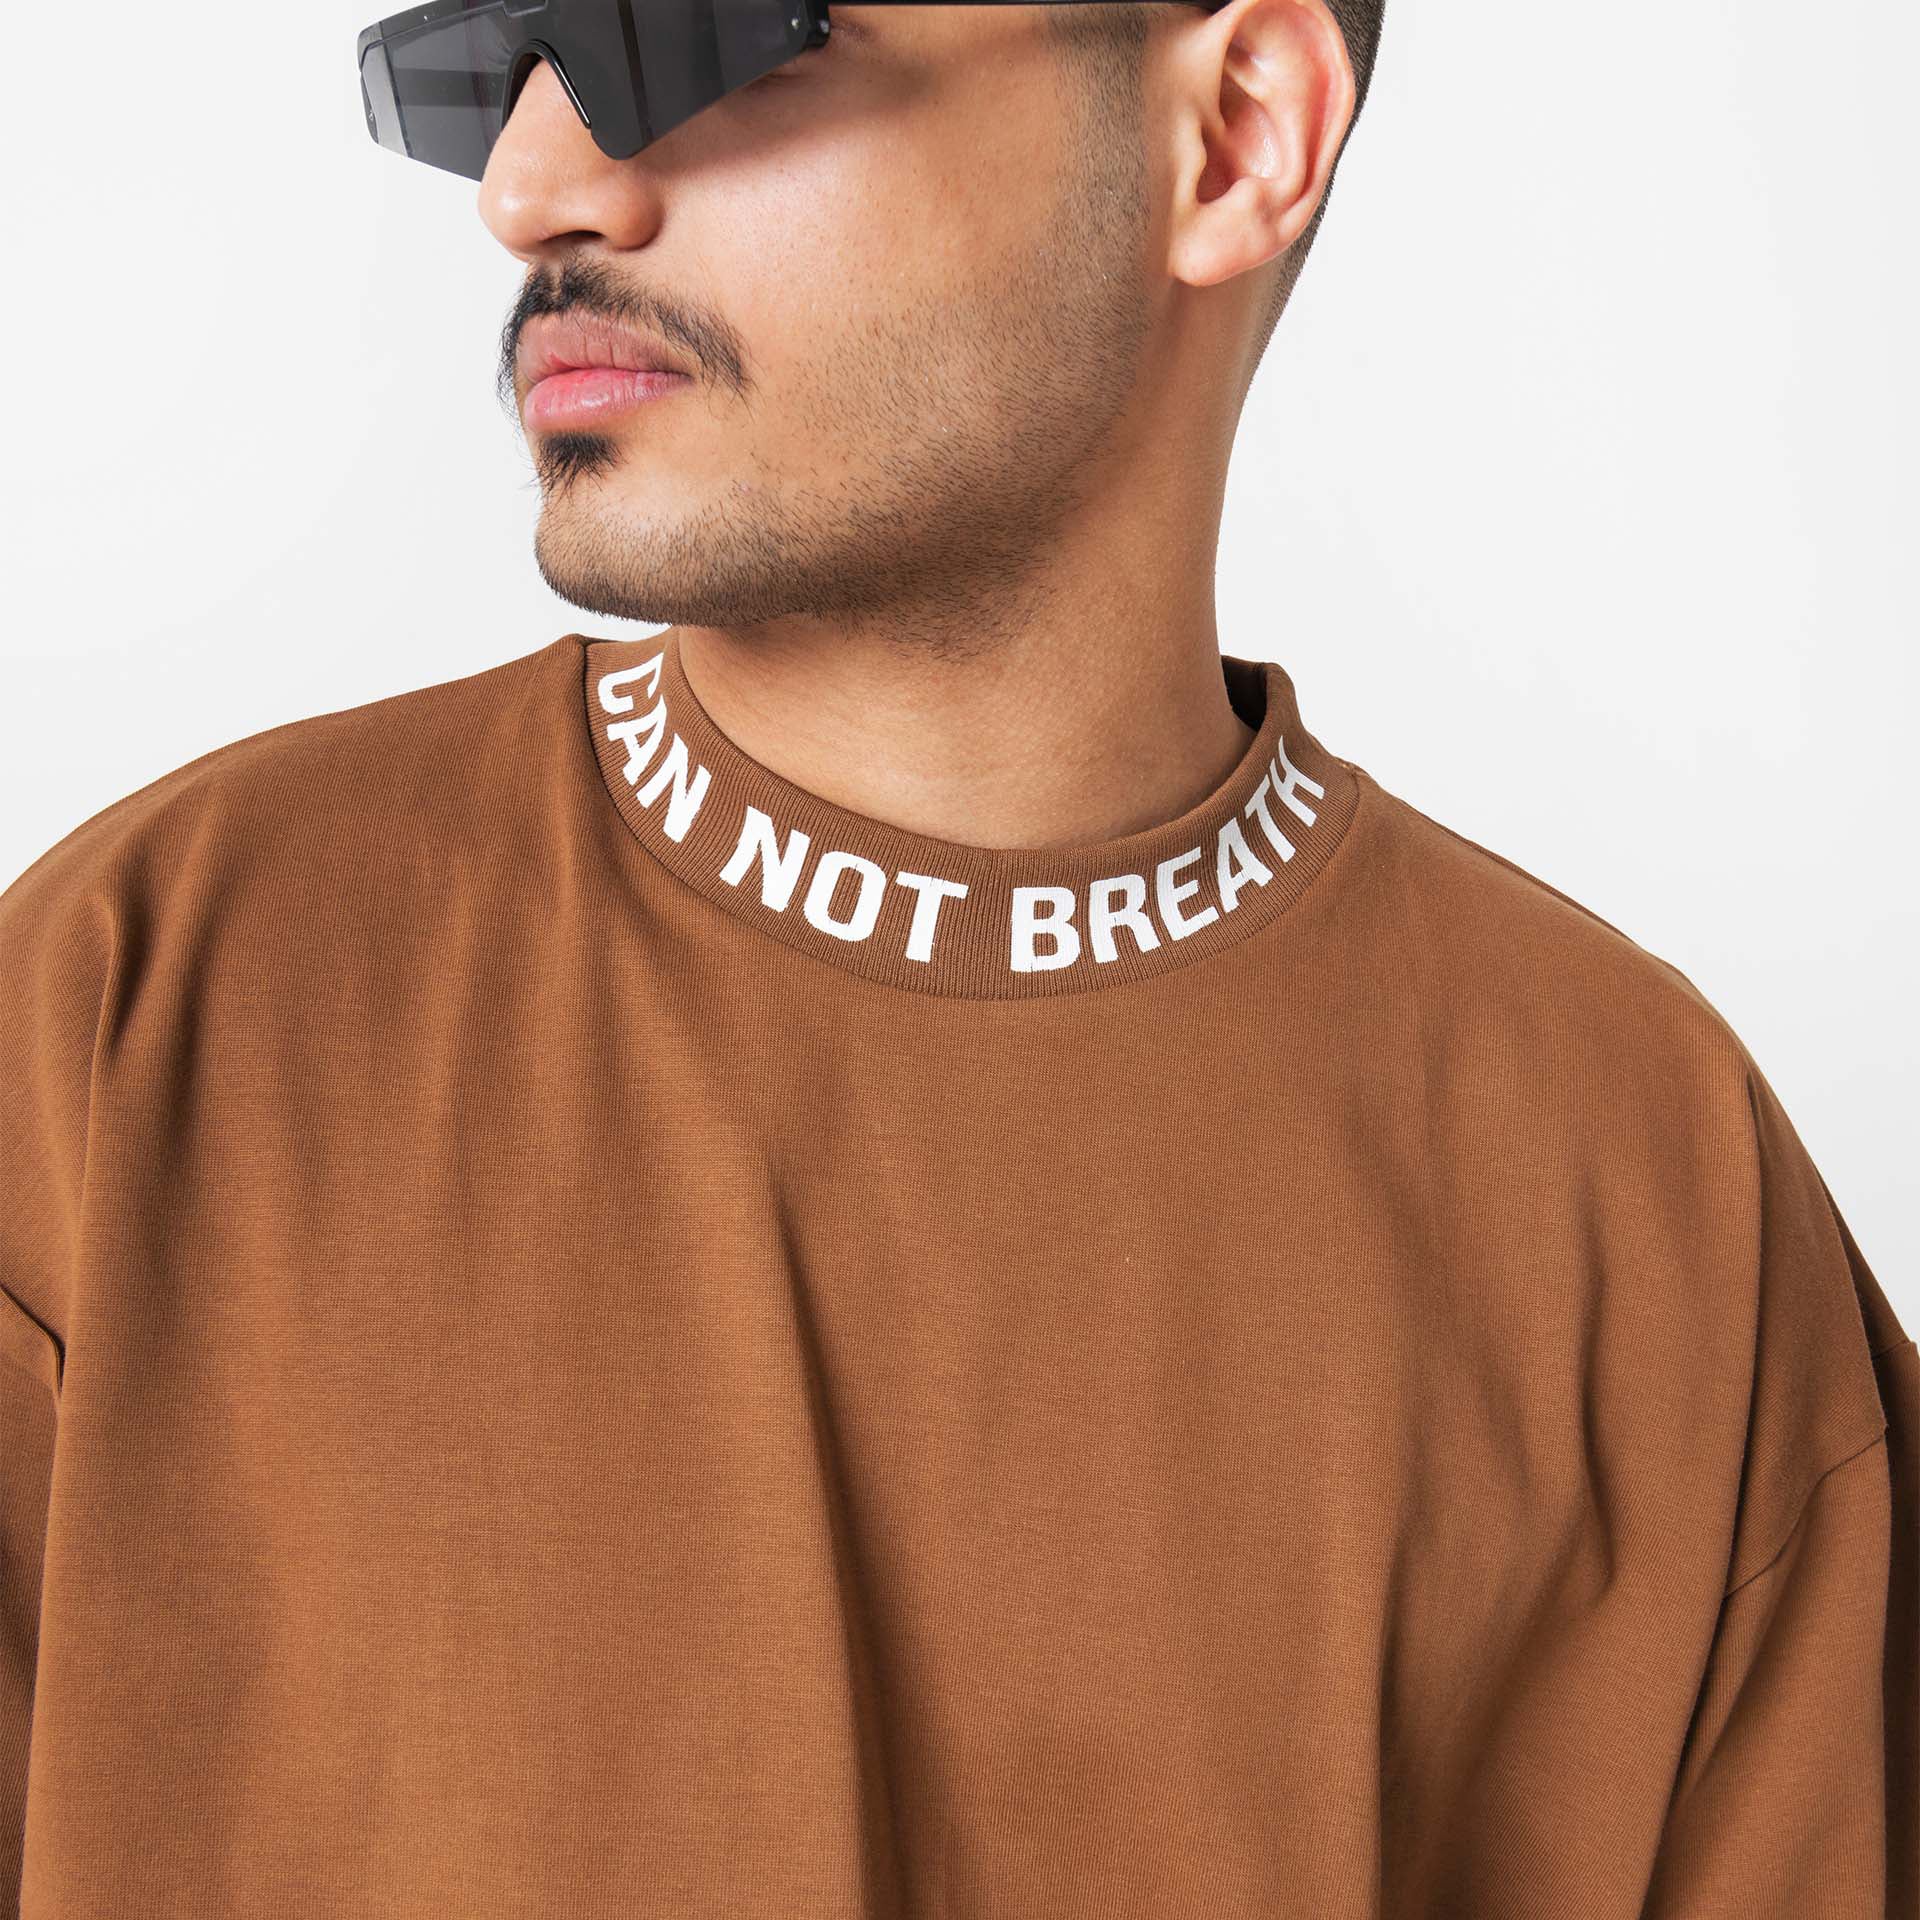 Can Not Breath T-Shirt From DFRNT